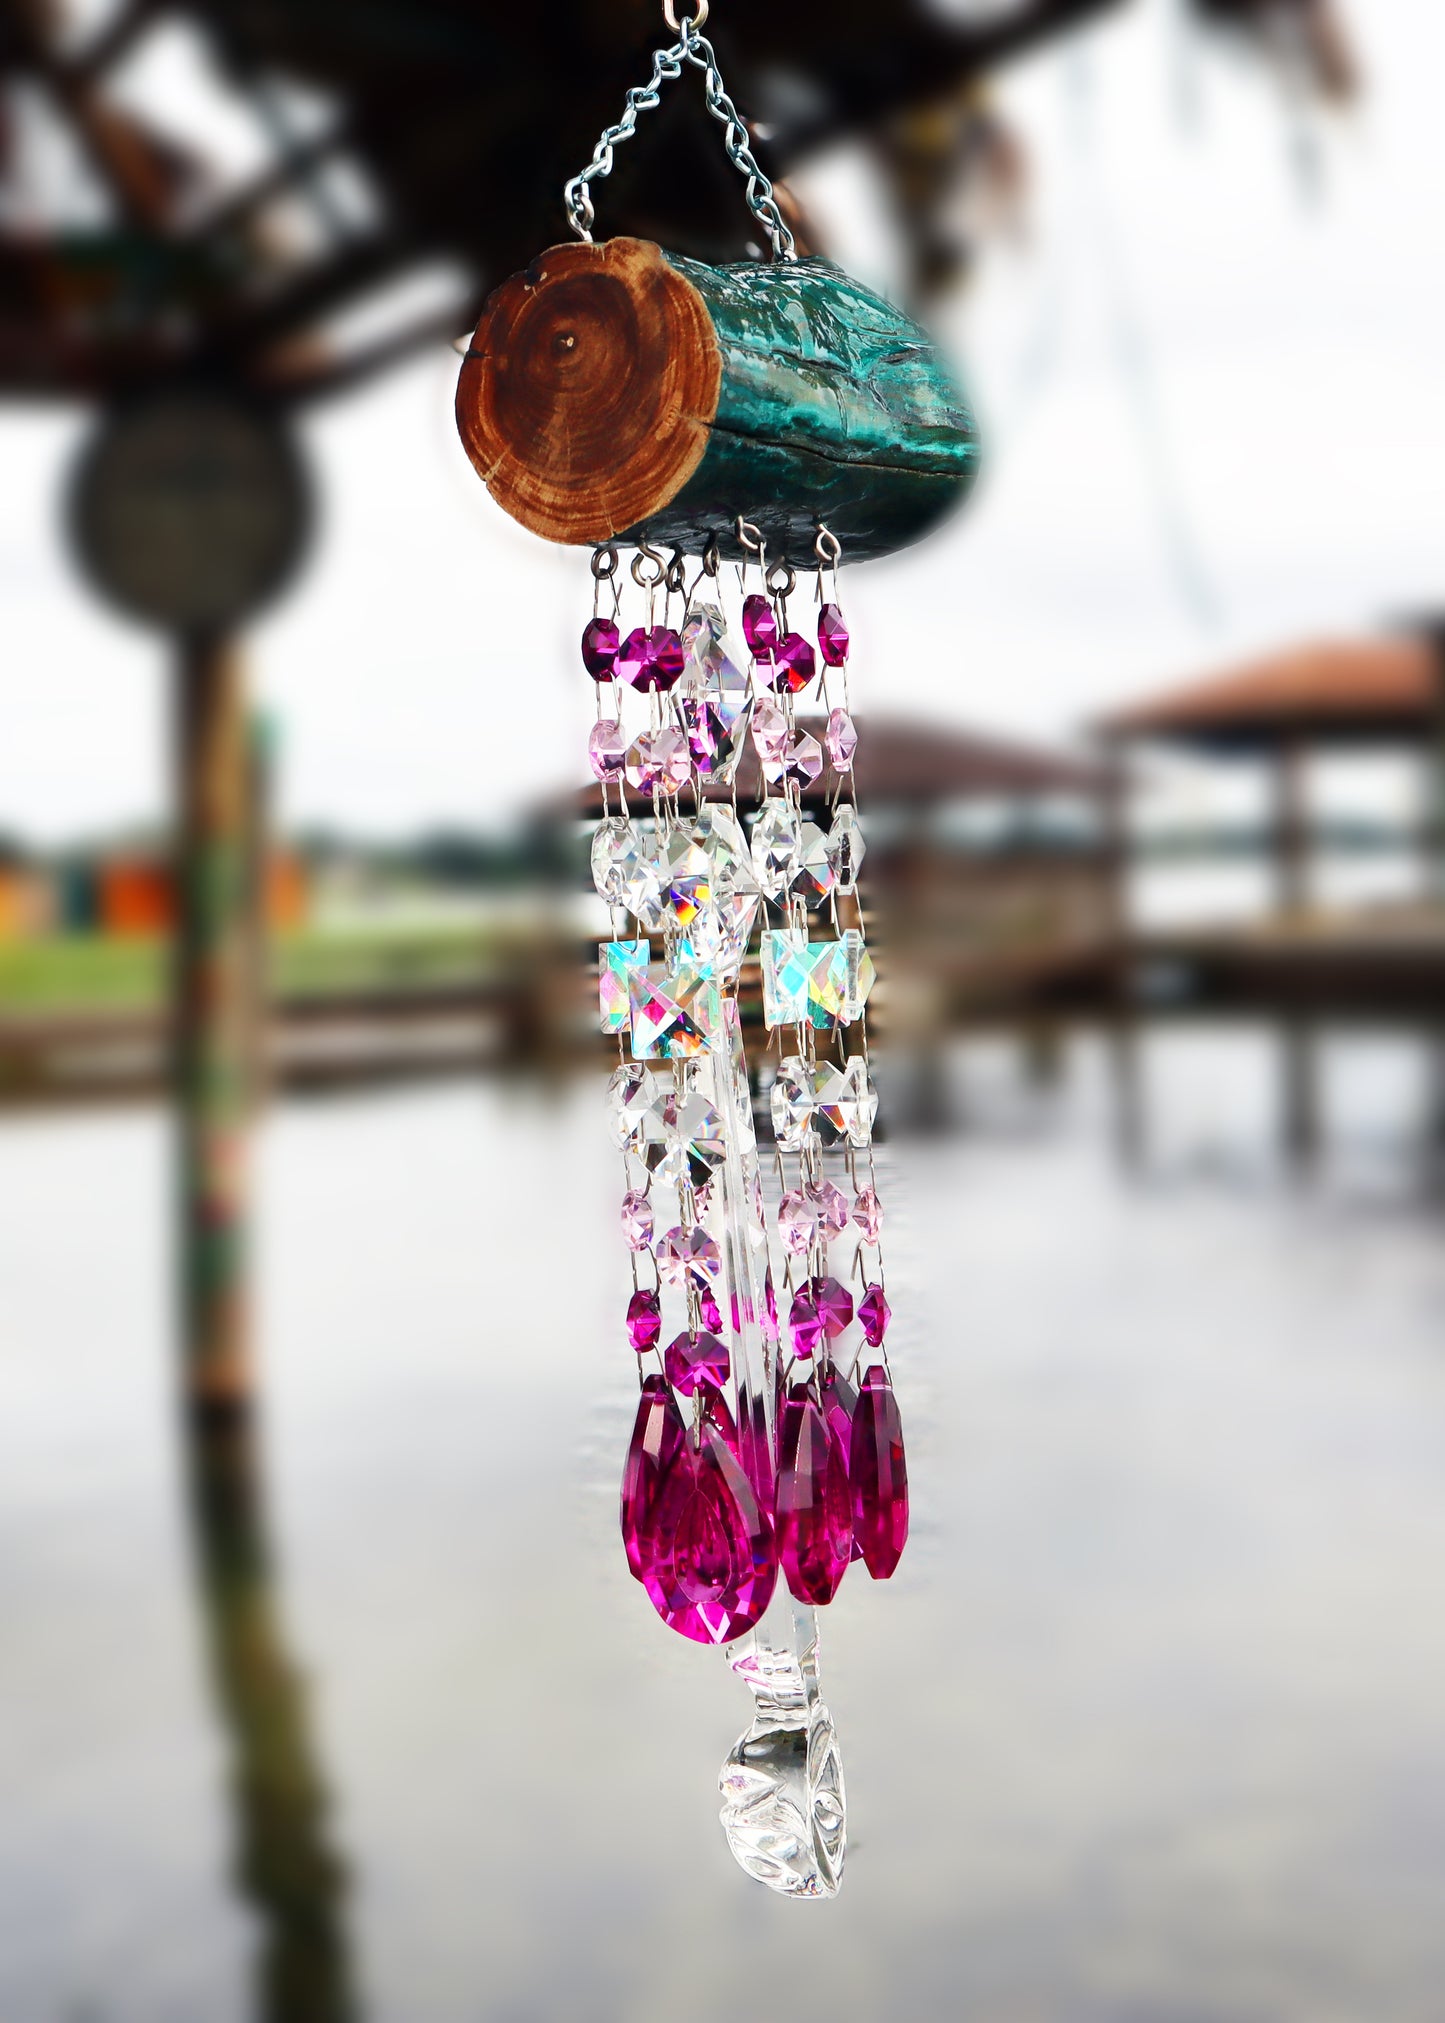 driftwood epoxy resin wind-chime chandelier crystal handmade art unique gift